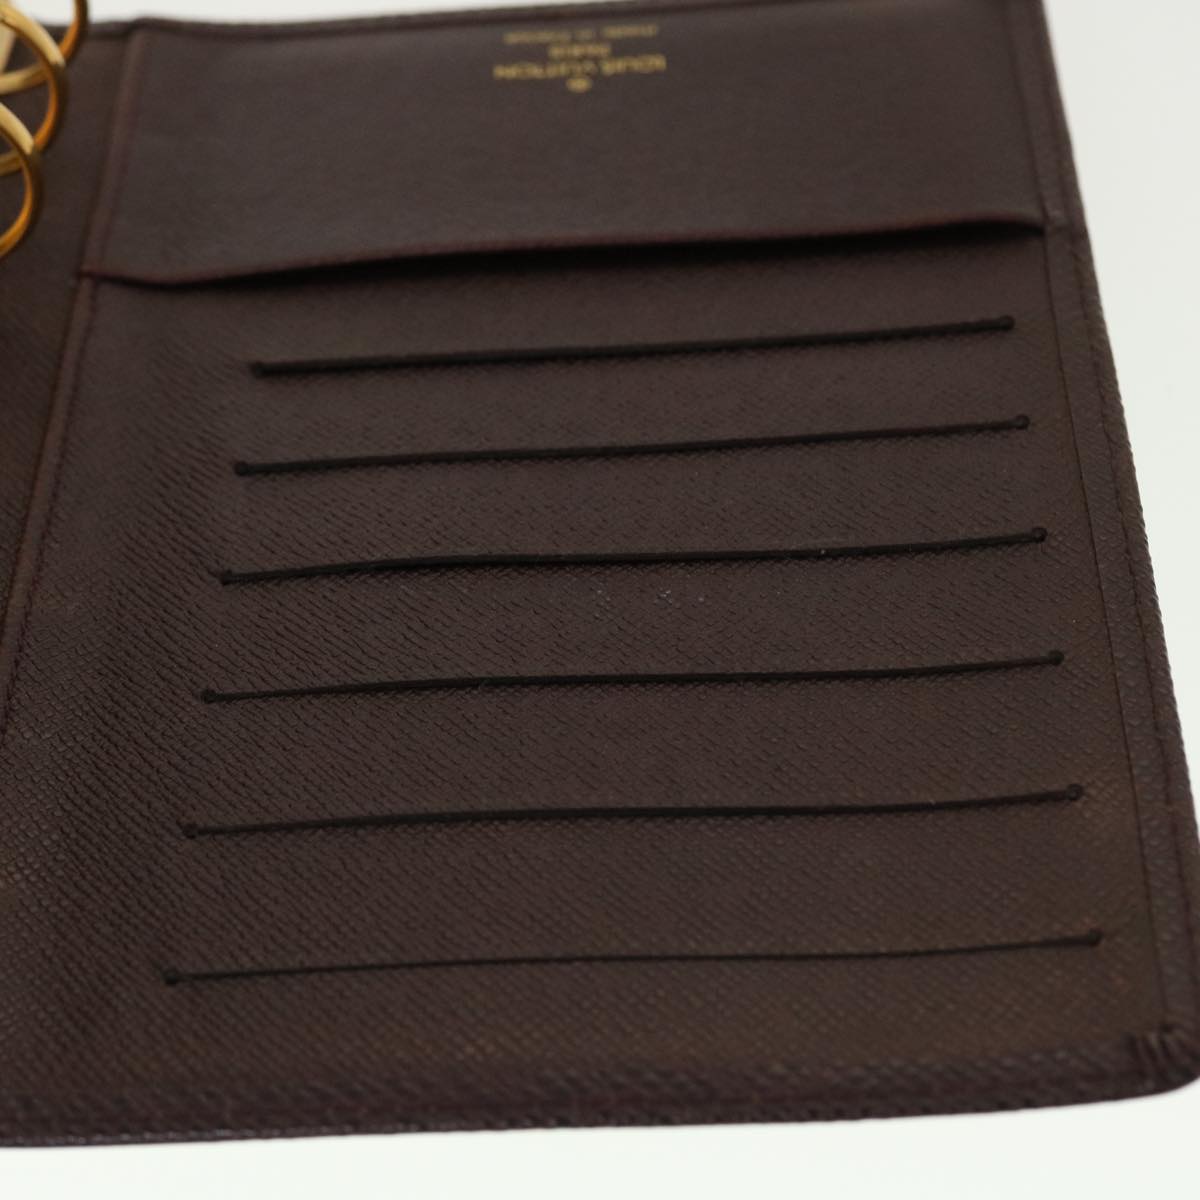 LOUIS VUITTON Taiga Leather Agenda MM Day Planner Cover Acajou R20416 Auth 45149